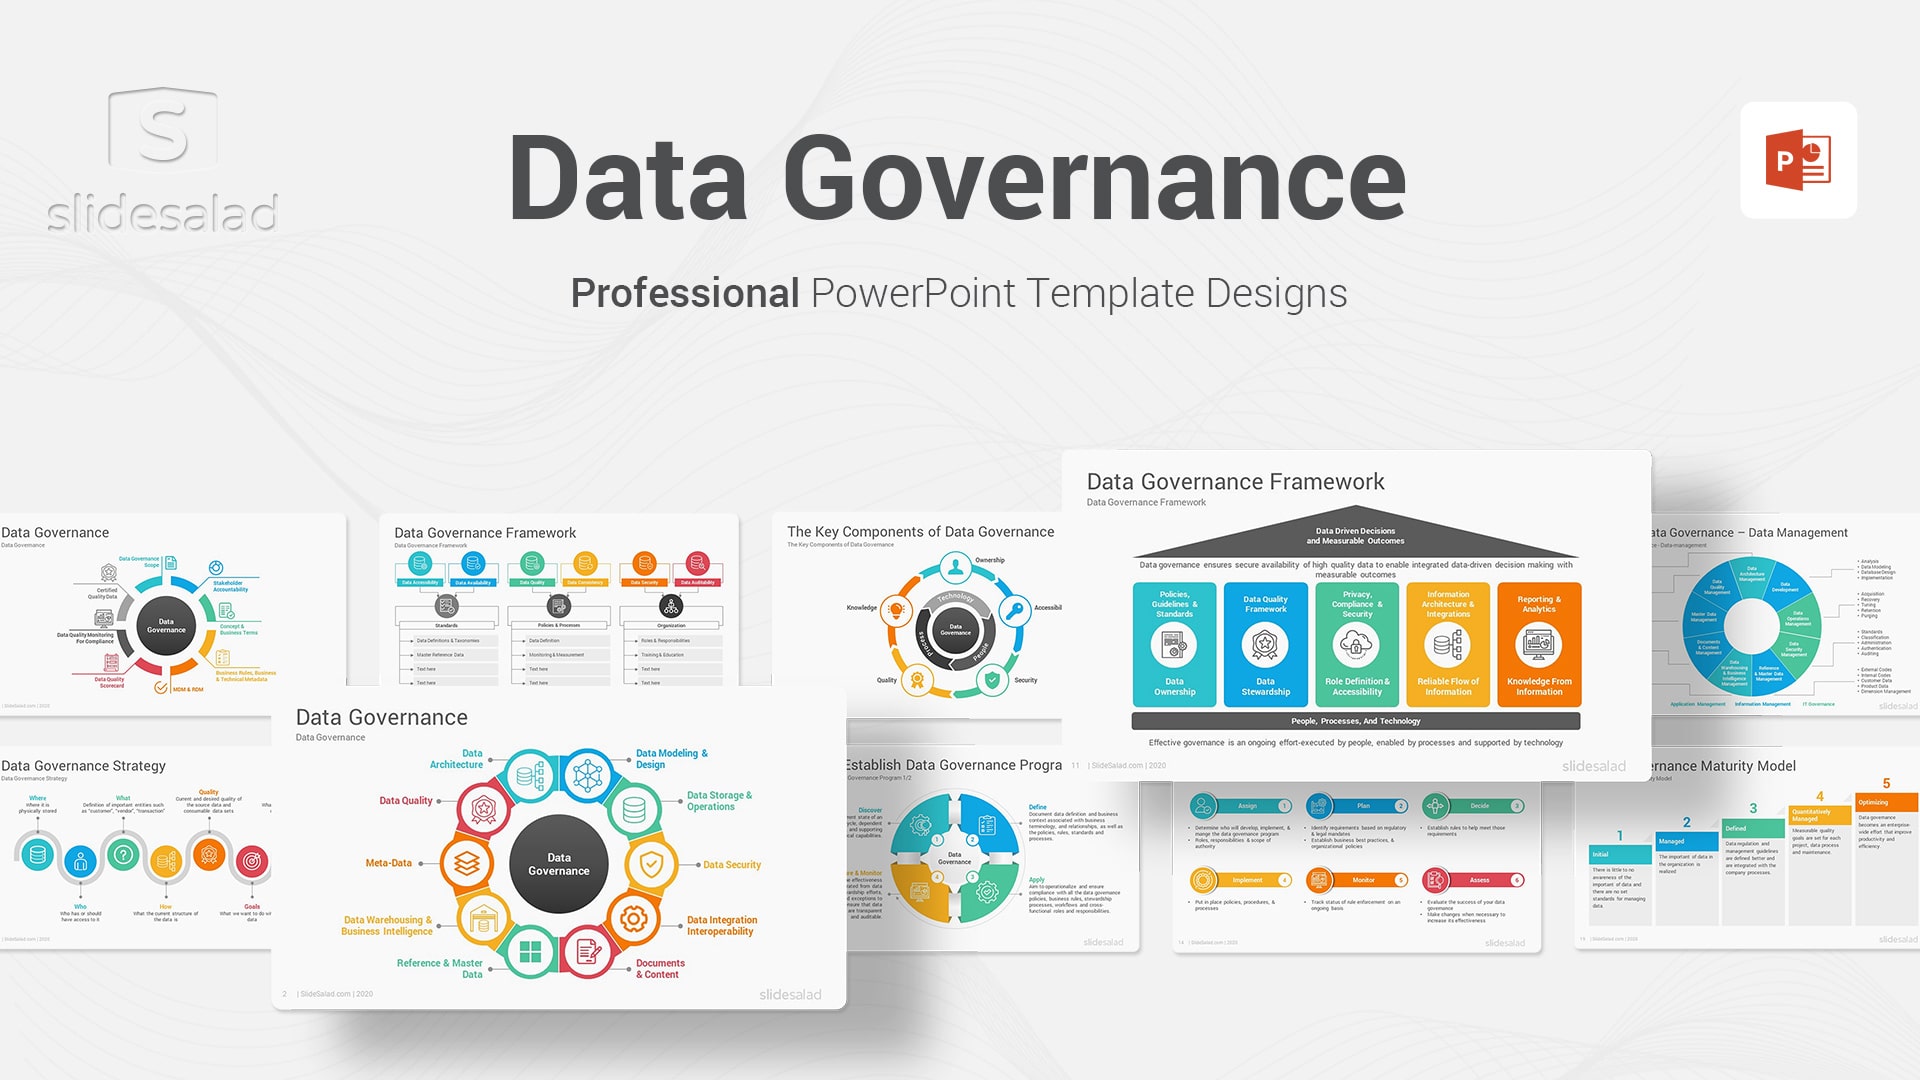 Data Governance PowerPoint Template PPT Slides - Learn to Get Control of Your Data with Governance with This Attractive Theme